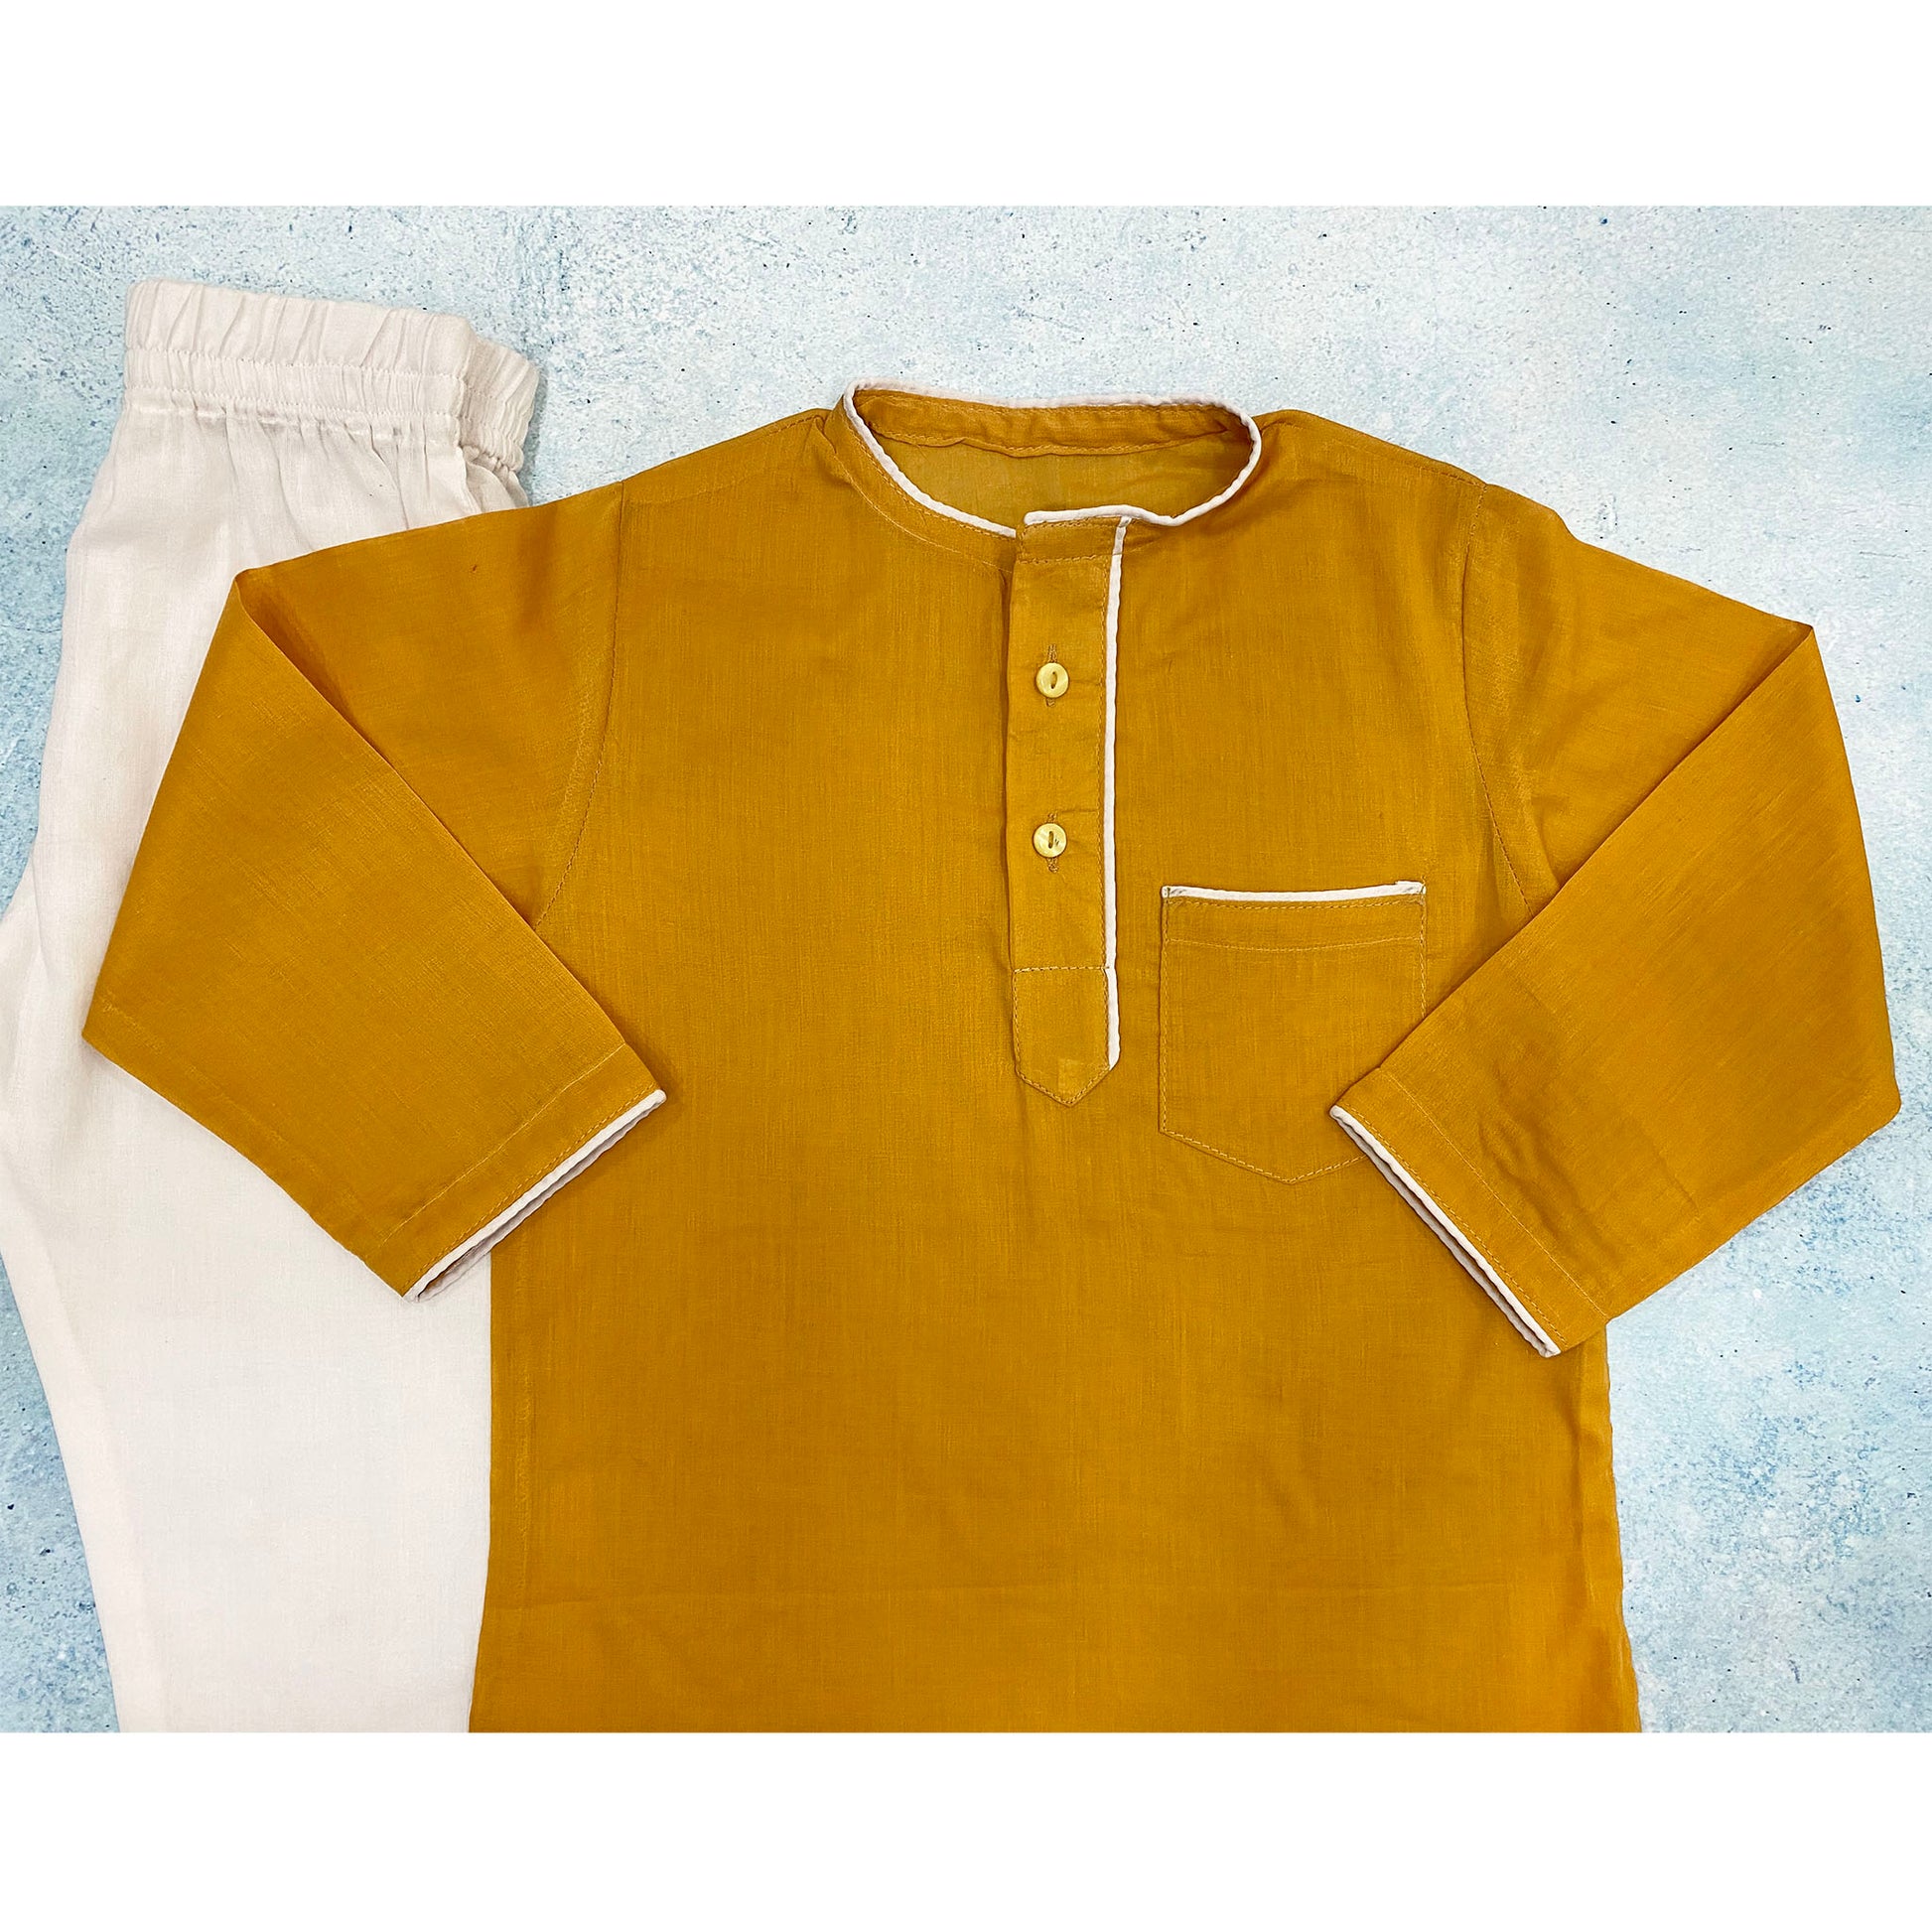 diwali-outfit-for-baby-boys-online